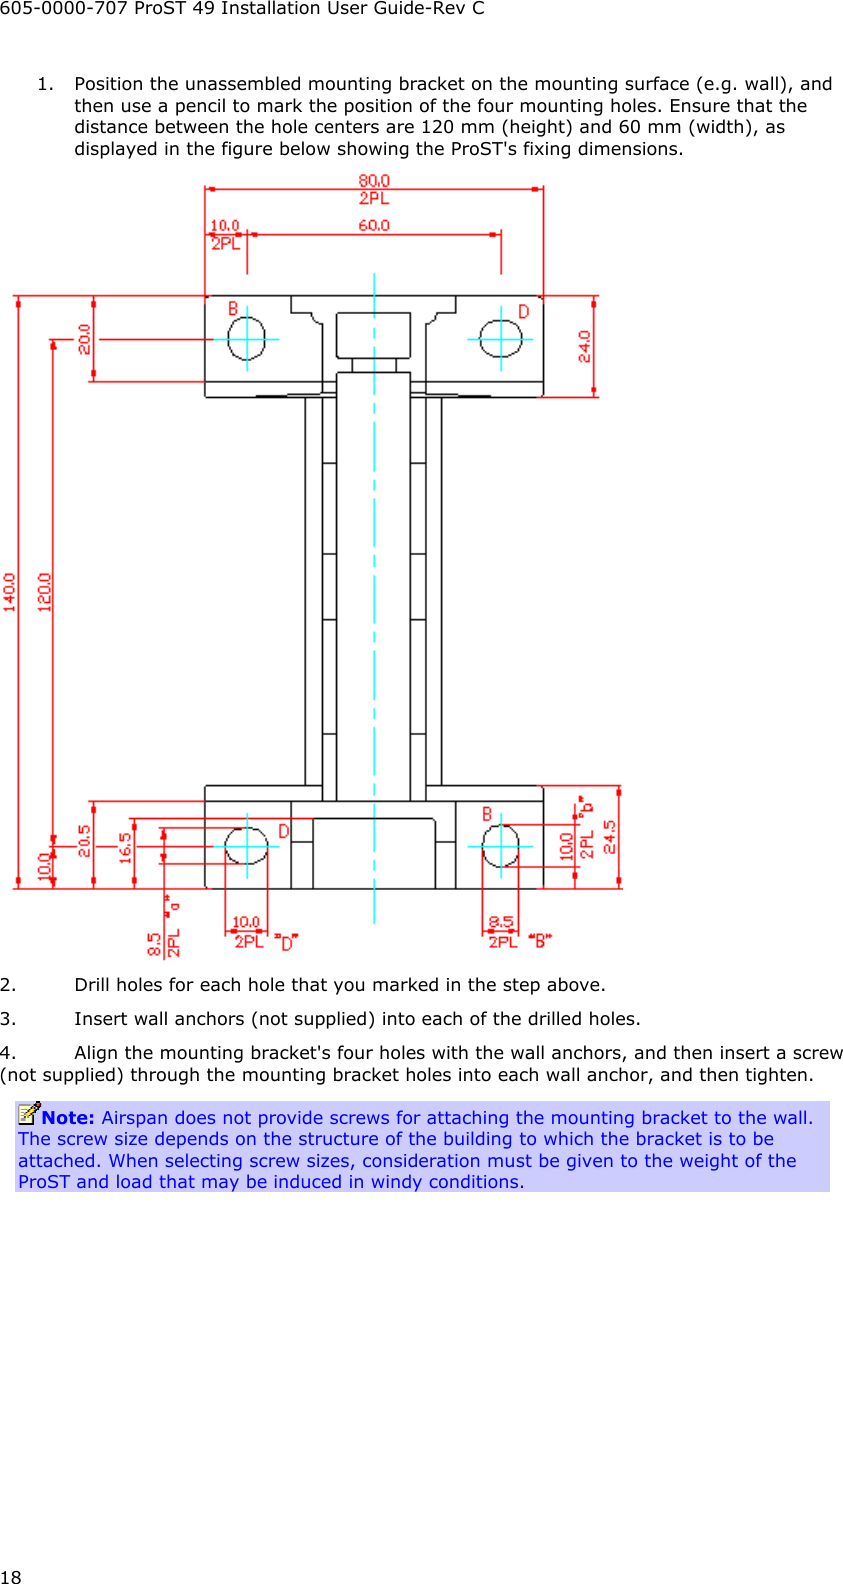 605-0000-707 ProST 49 Installation User Guide-Rev C 18 1. Position the unassembled mounting bracket on the mounting surface (e.g. wall), and then use a pencil to mark the position of the four mounting holes. Ensure that the distance between the hole centers are 120 mm (height) and 60 mm (width), as displayed in the figure below showing the ProST&apos;s fixing dimensions.  2. Drill holes for each hole that you marked in the step above. 3. Insert wall anchors (not supplied) into each of the drilled holes. 4. Align the mounting bracket&apos;s four holes with the wall anchors, and then insert a screw (not supplied) through the mounting bracket holes into each wall anchor, and then tighten. Note: Airspan does not provide screws for attaching the mounting bracket to the wall. The screw size depends on the structure of the building to which the bracket is to be attached. When selecting screw sizes, consideration must be given to the weight of the ProST and load that may be induced in windy conditions. 